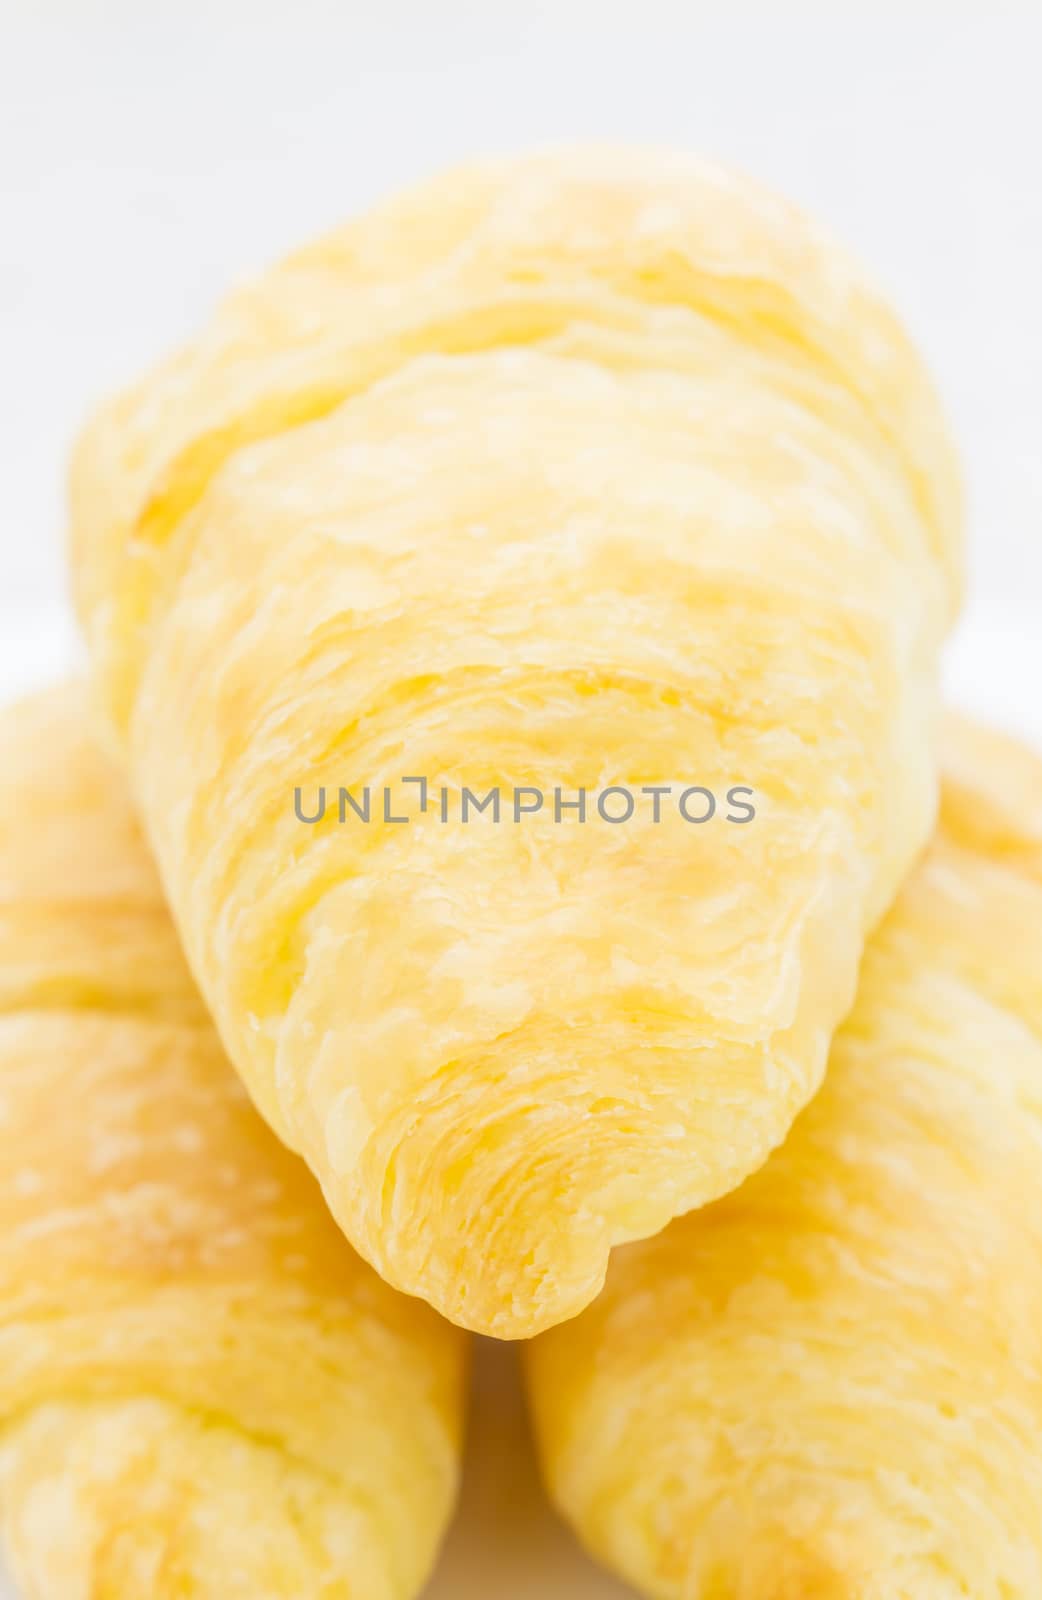 Croissant or Bread or bakery on white dish close up view